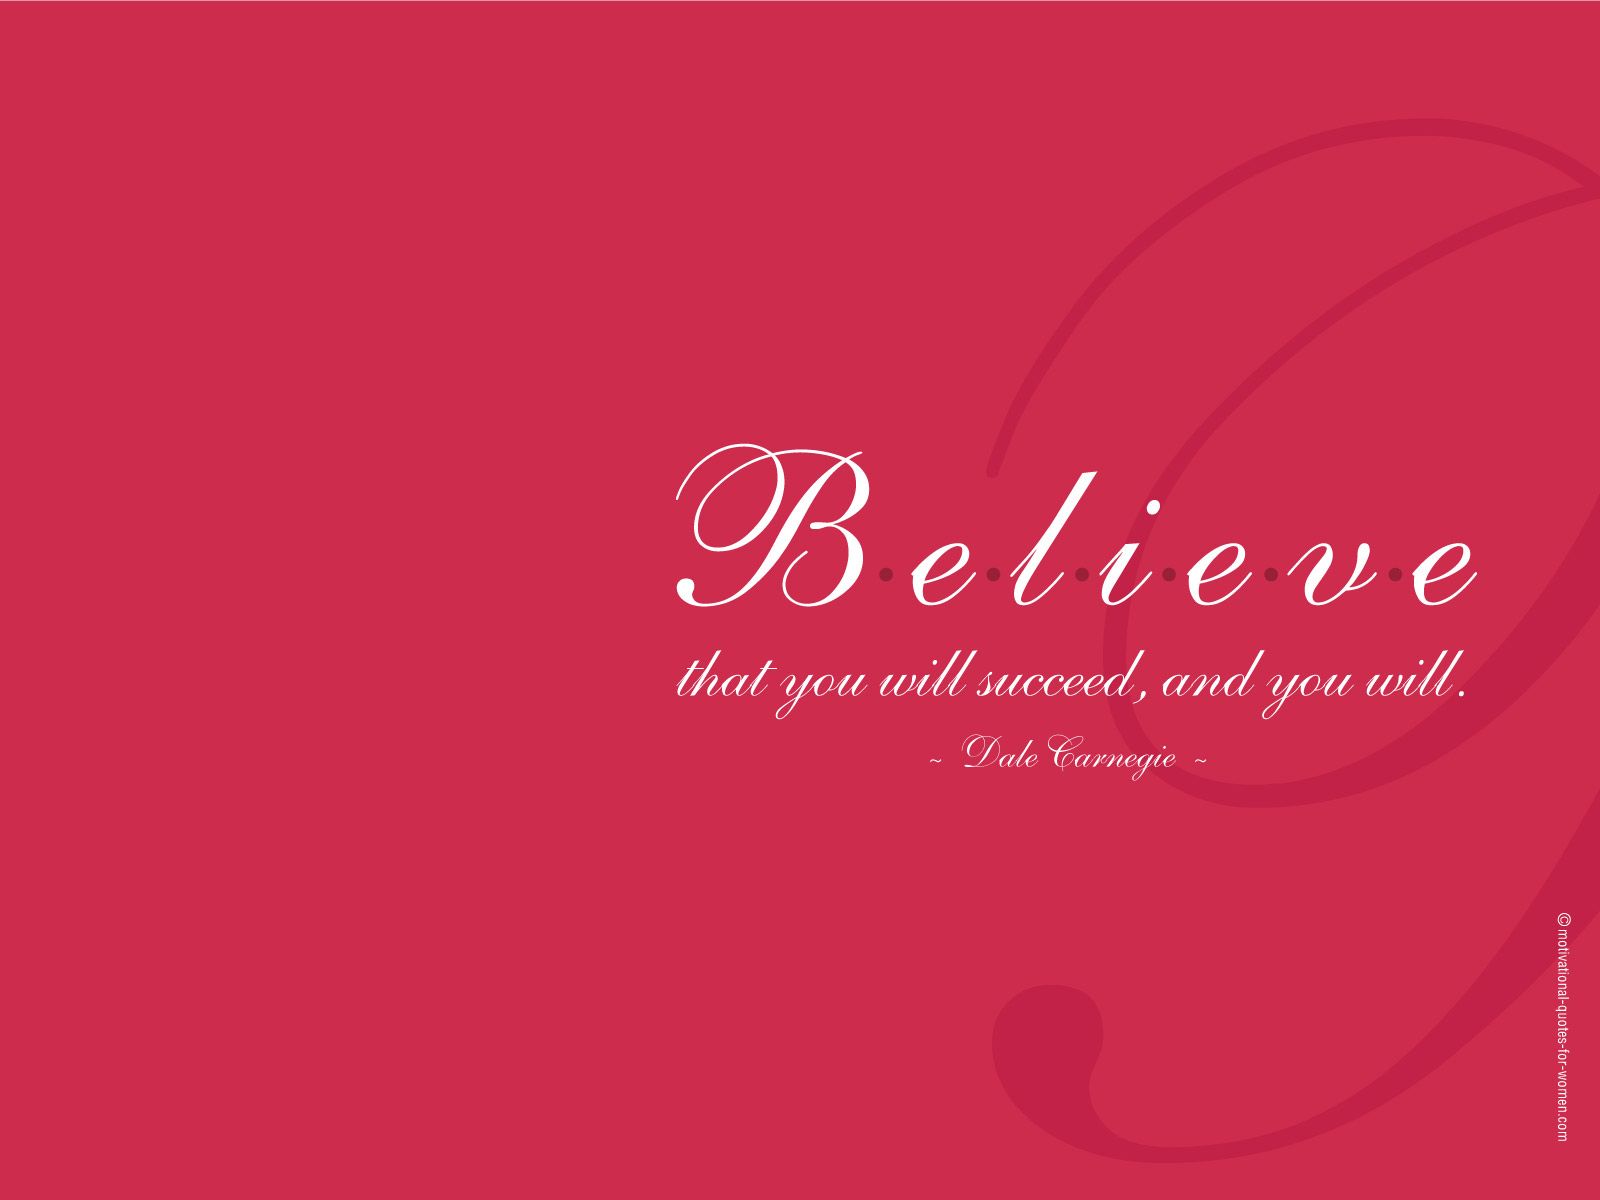 business quotes wallpapers